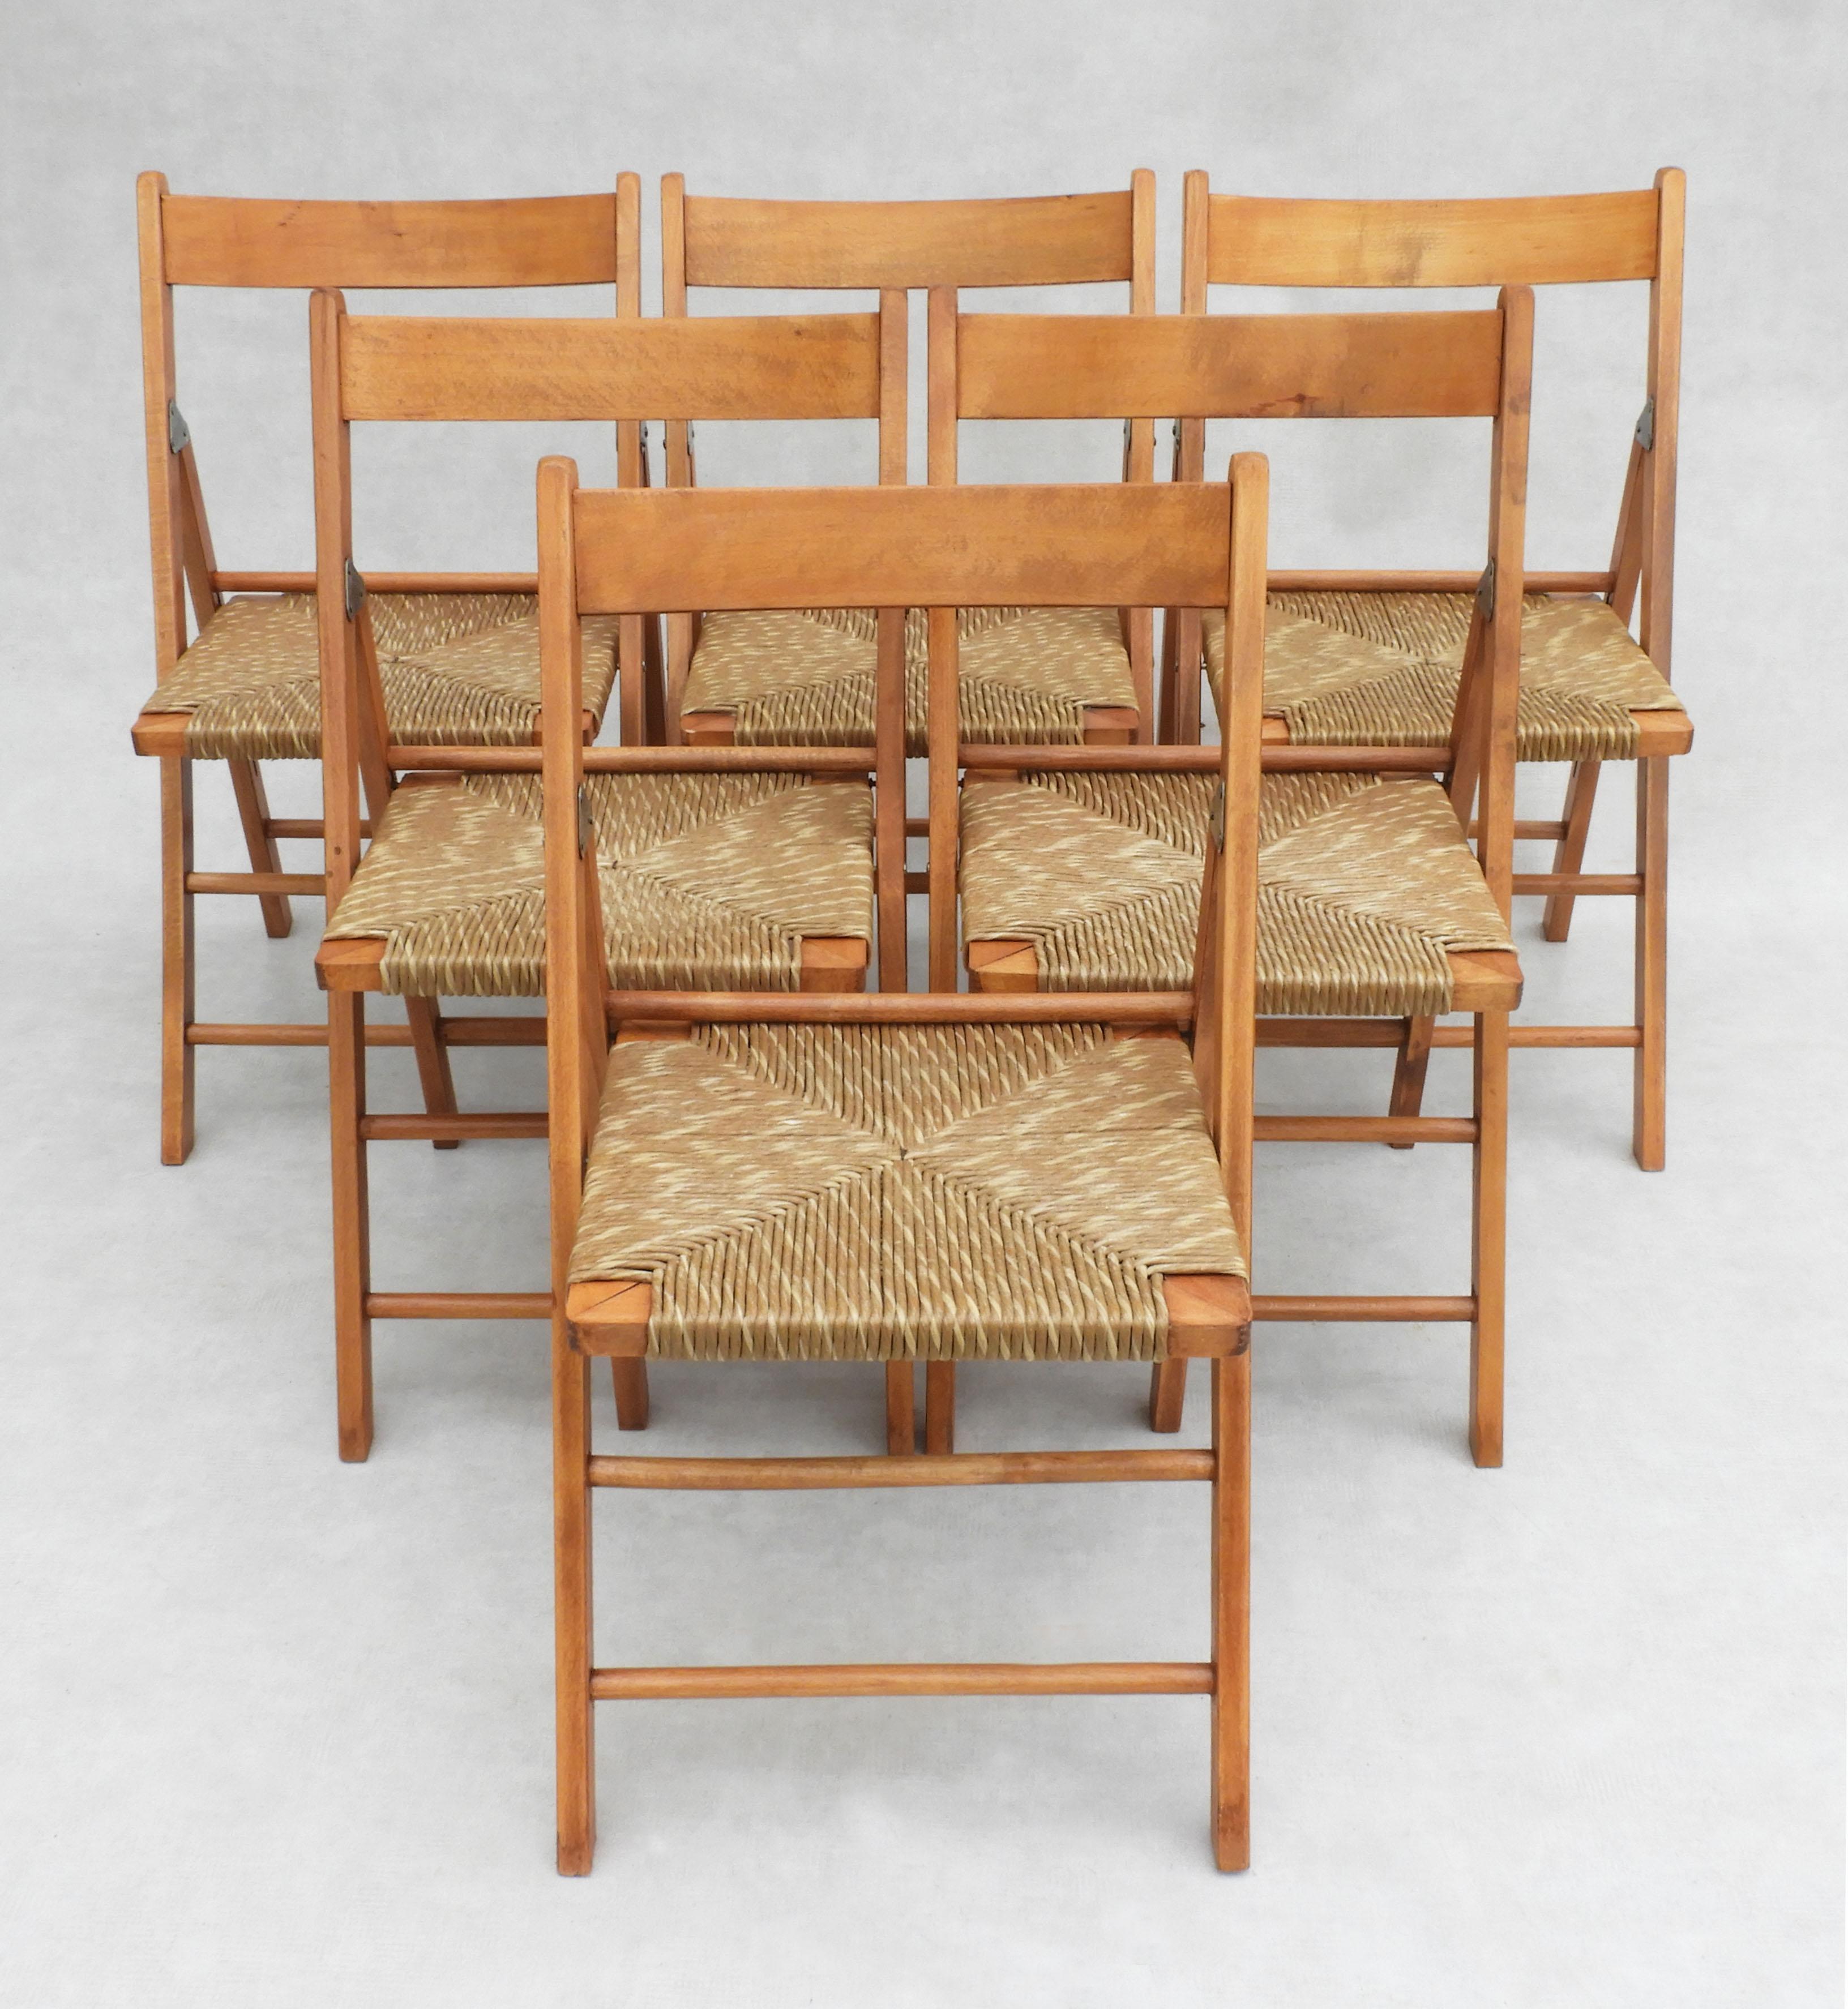 6 Vintage Coastal Beech Folding Chairs with Woven Paper Cord Seats C1970s France For Sale 5